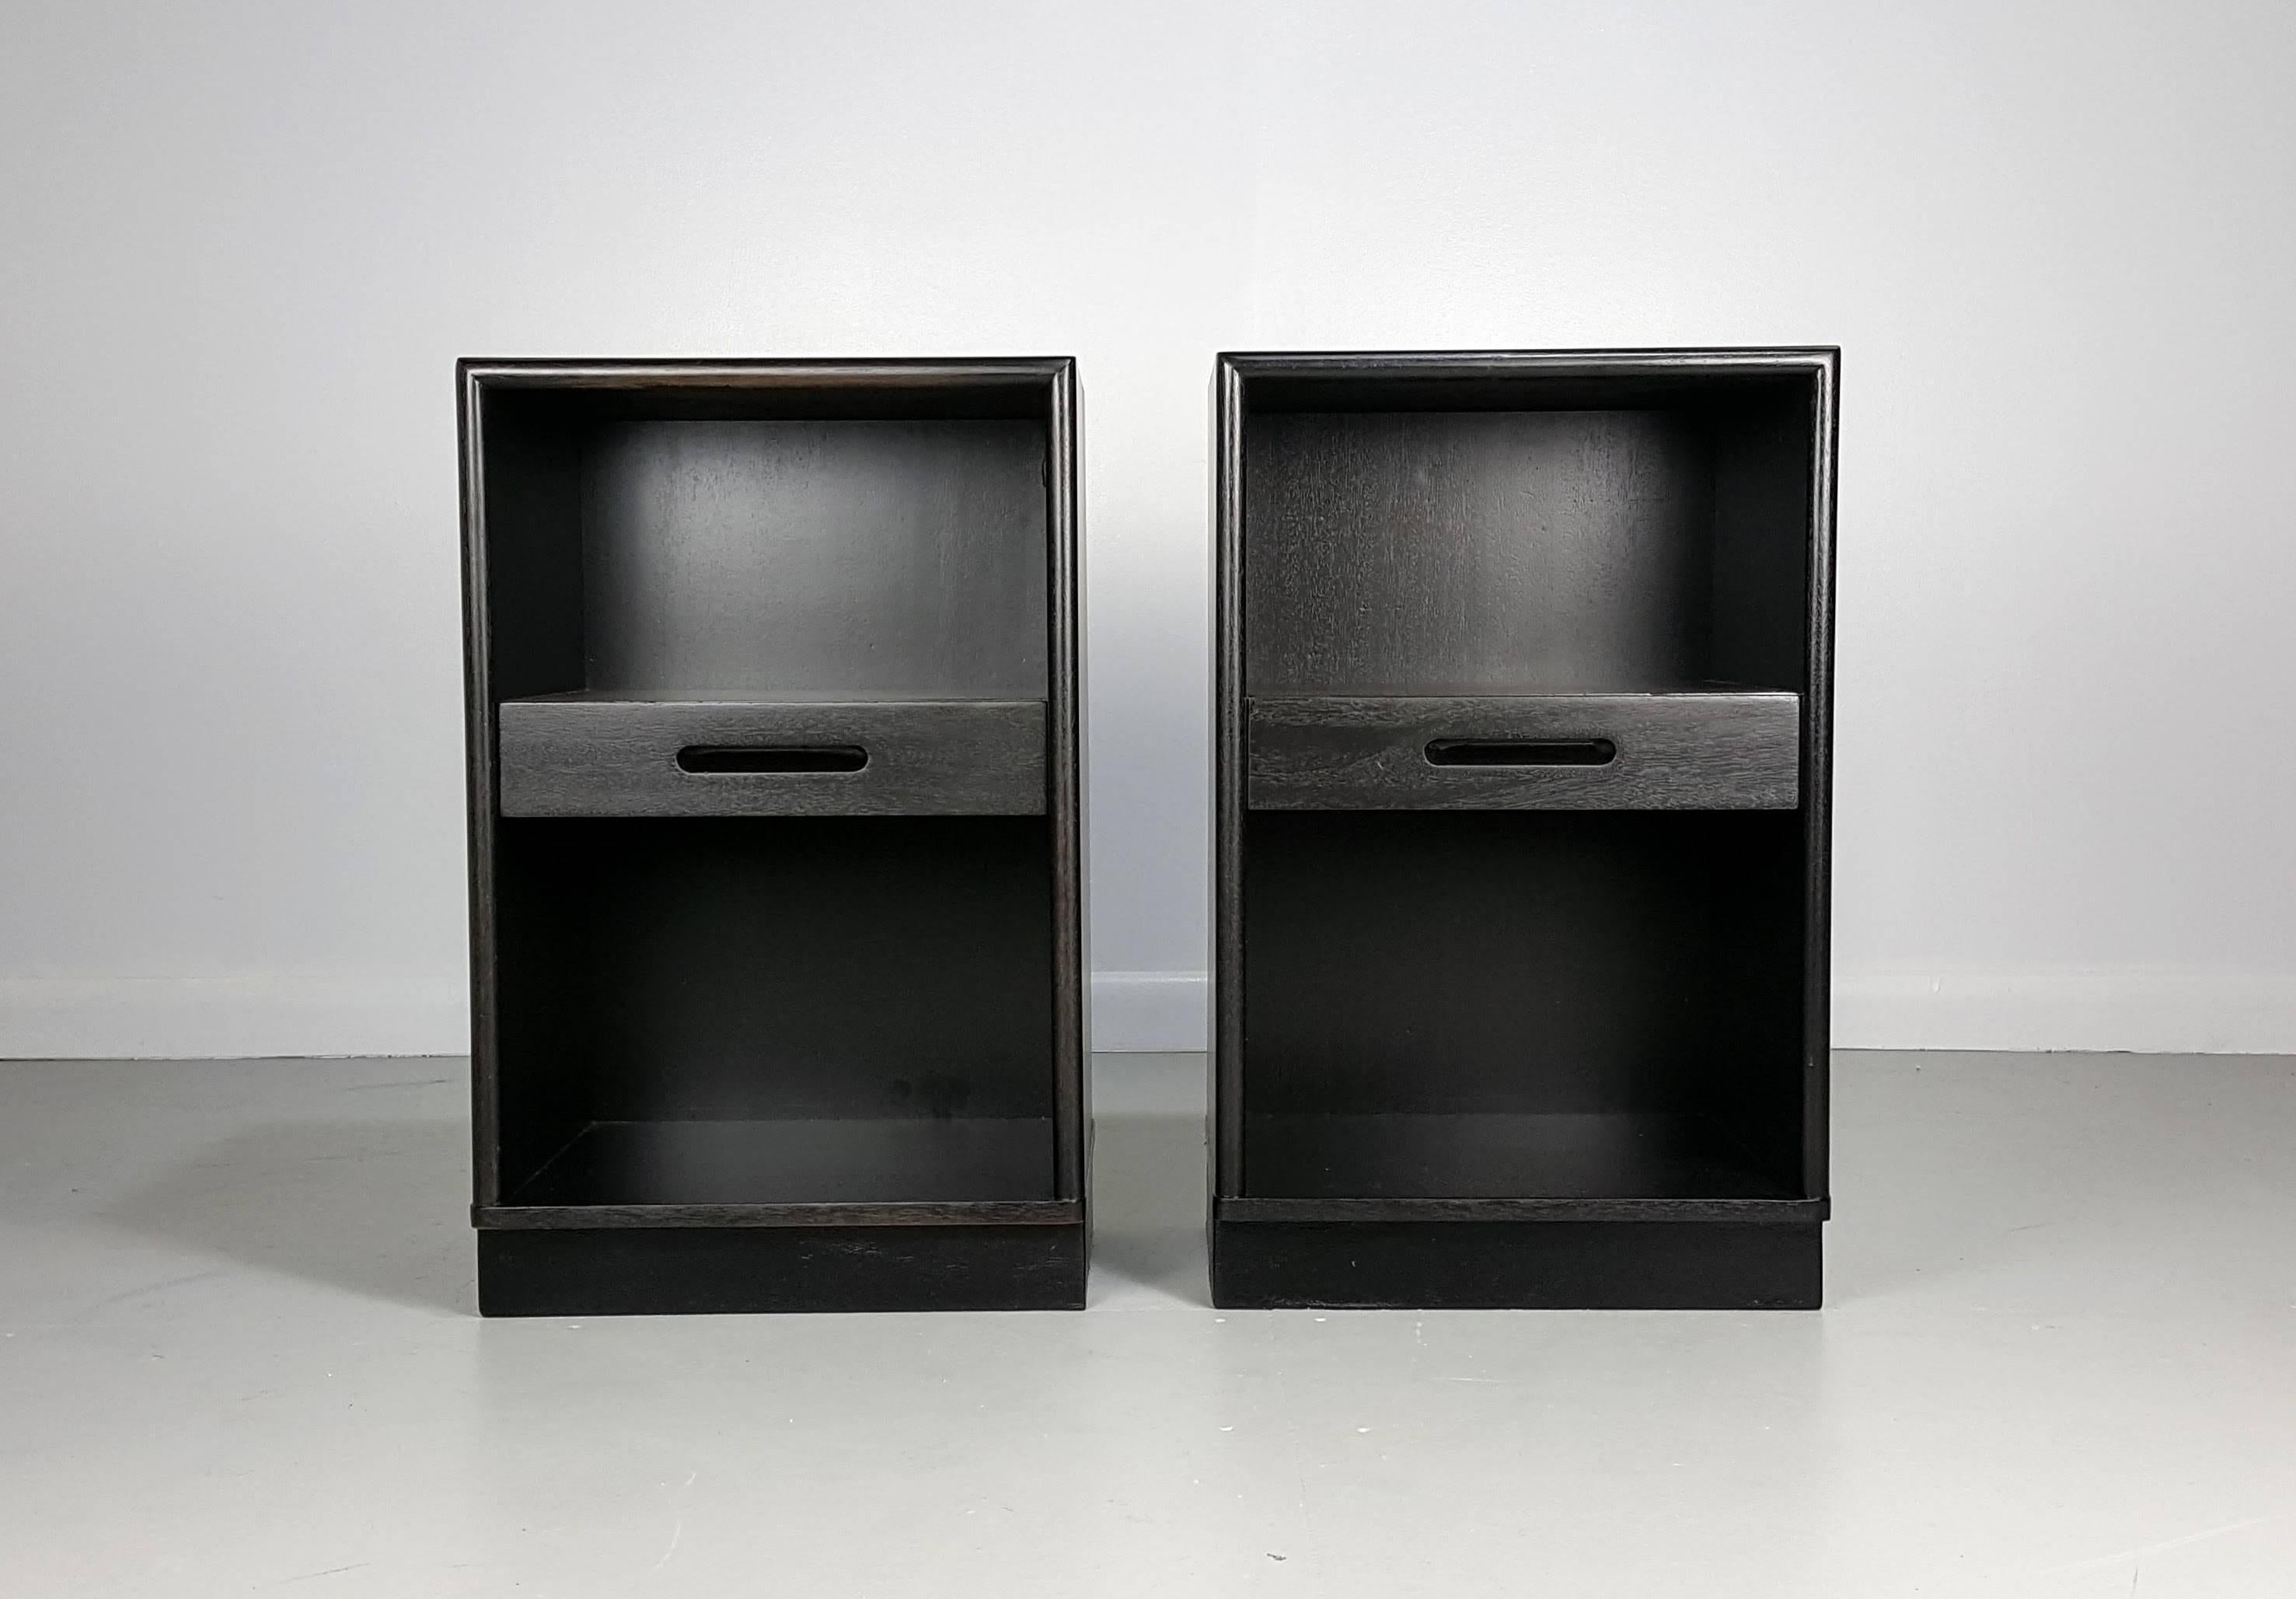 Handsome ebonized mahogany nightstands with leather plinth bases by Edward Wormley for Dunbar, 1950s. Fully restored and in excellent condition.

We offer free regular deliveries to NYC and Philadelphia area. Delivery to DC, MD, CT and MA are